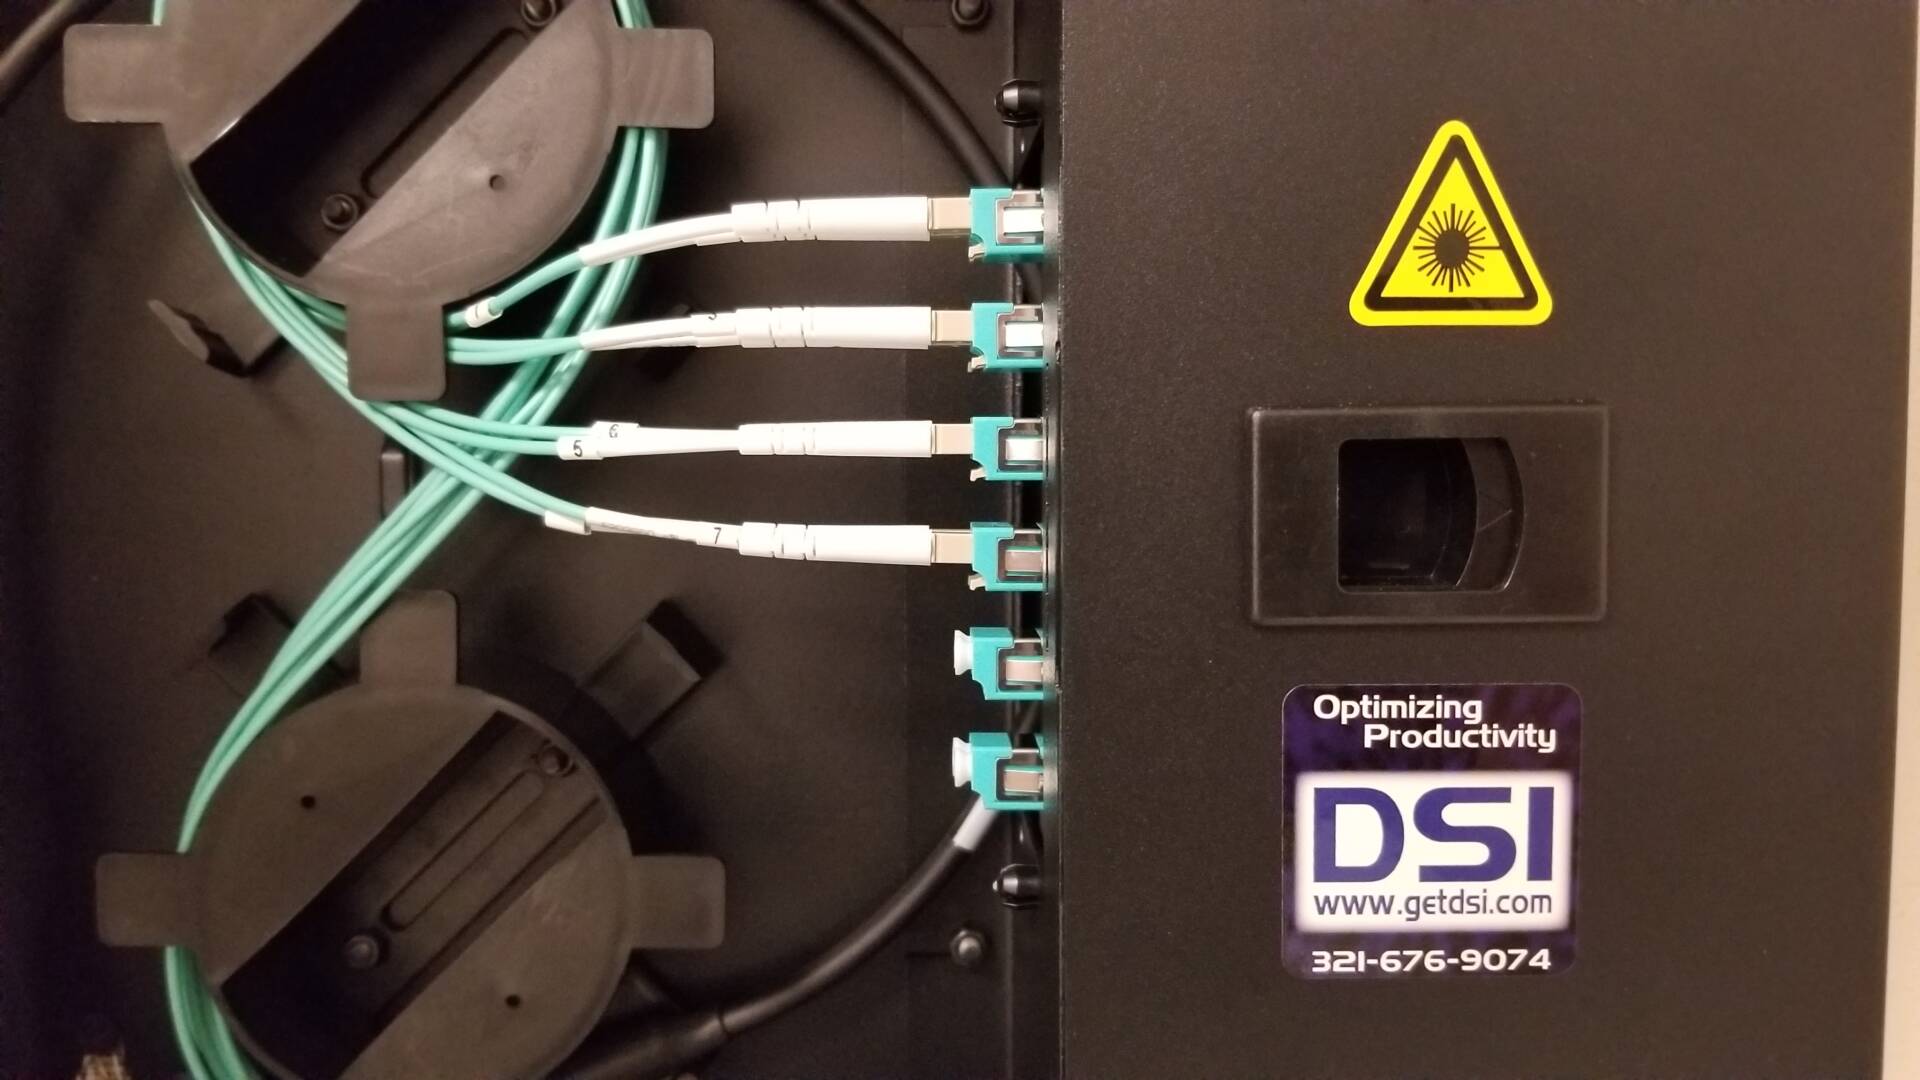 Fiber Connectivity: The Optimal Choice for Office Building Integration with DSI